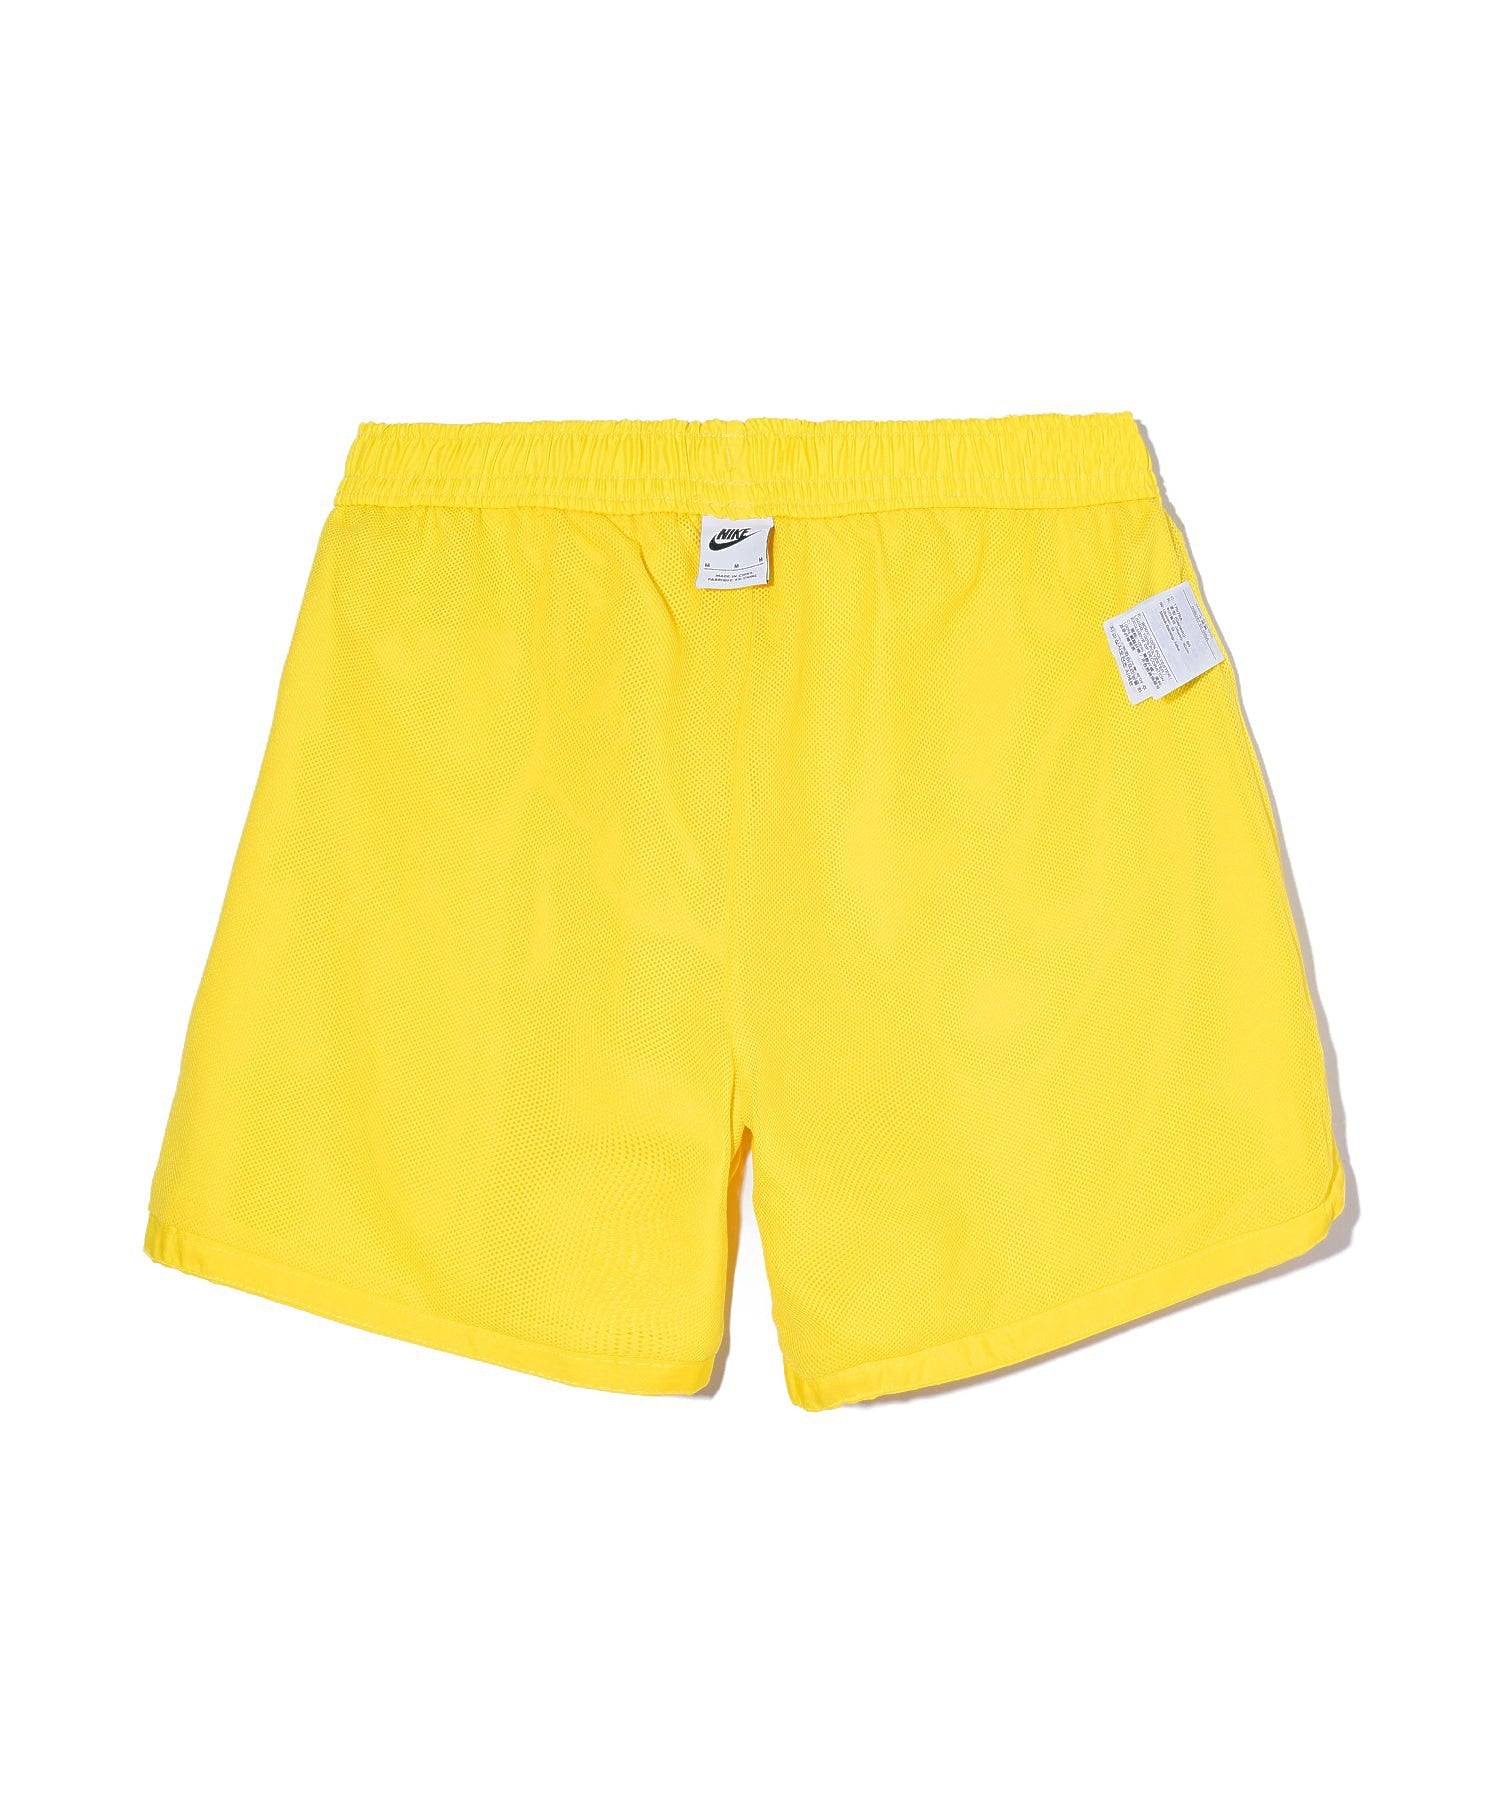 NIKE/ナイキ/SPORT ESSENTIALS WOVEN LINED FLOW SHORTS/DM6830